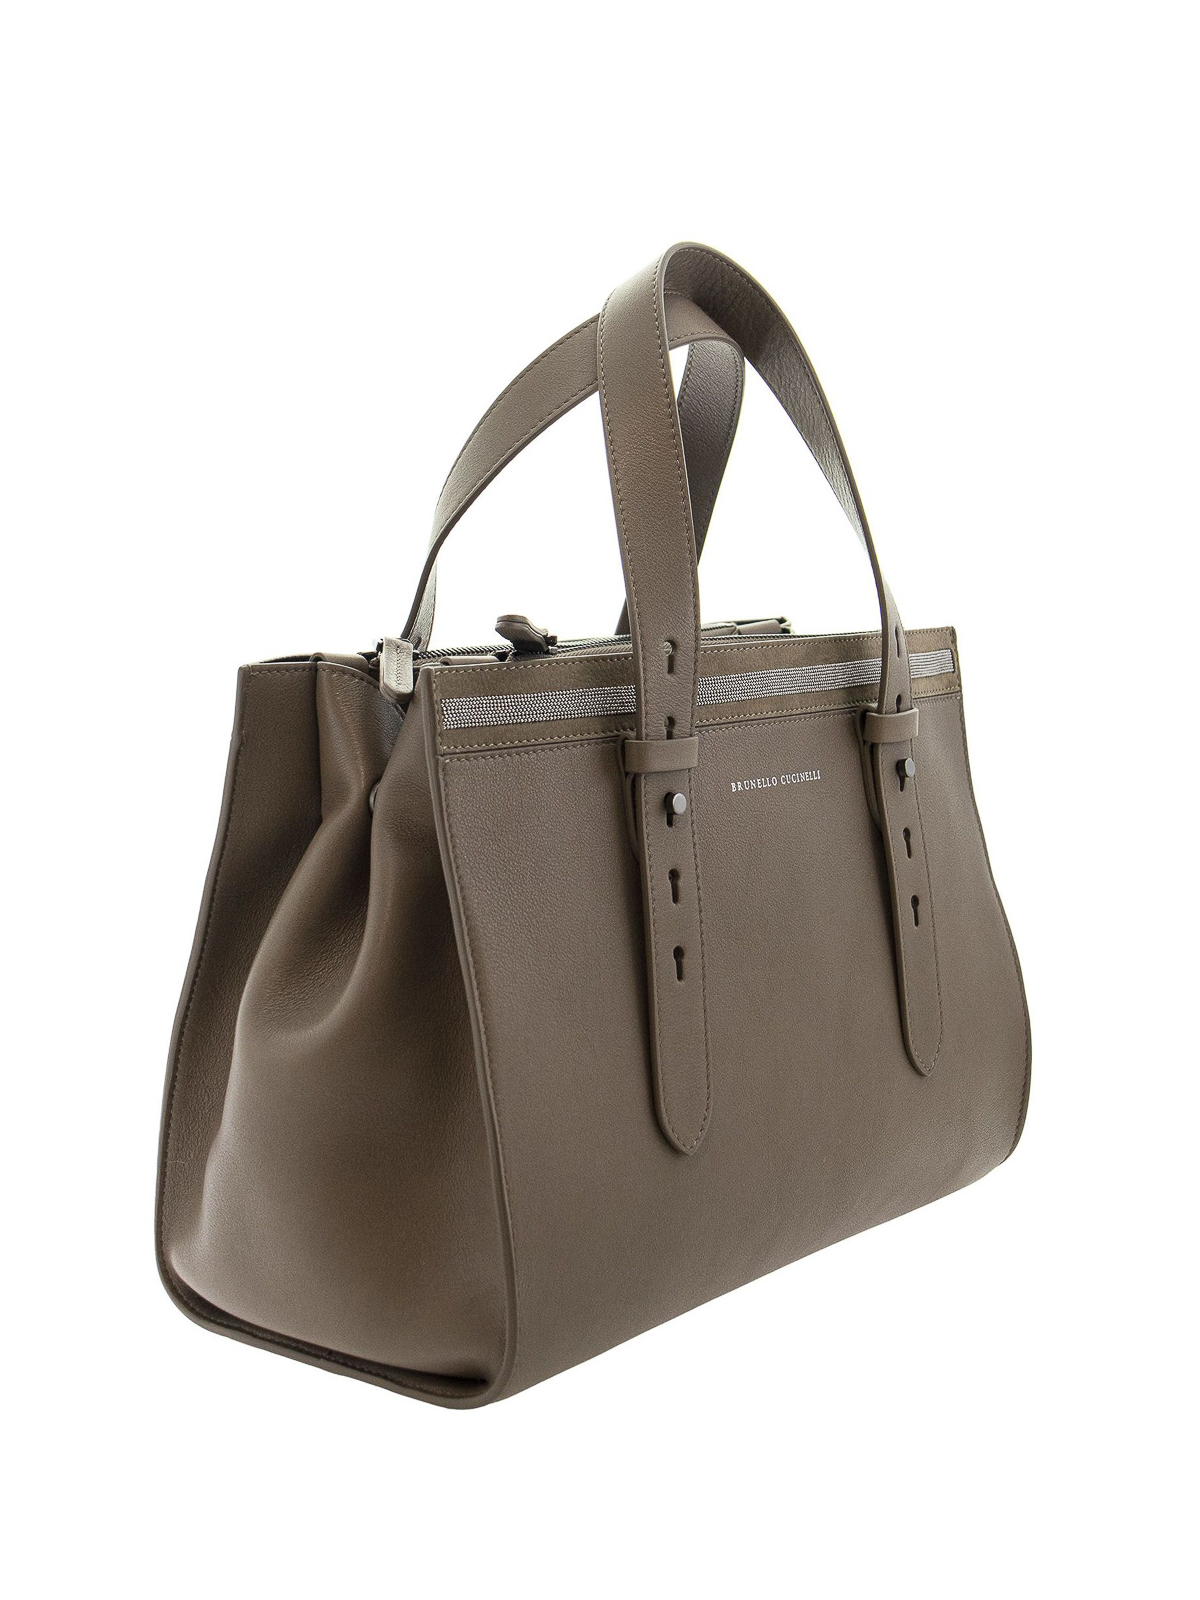 Totes bags Brunello Cucinelli - Leather tote - MBSMD2177C5859 | iKRIX.com